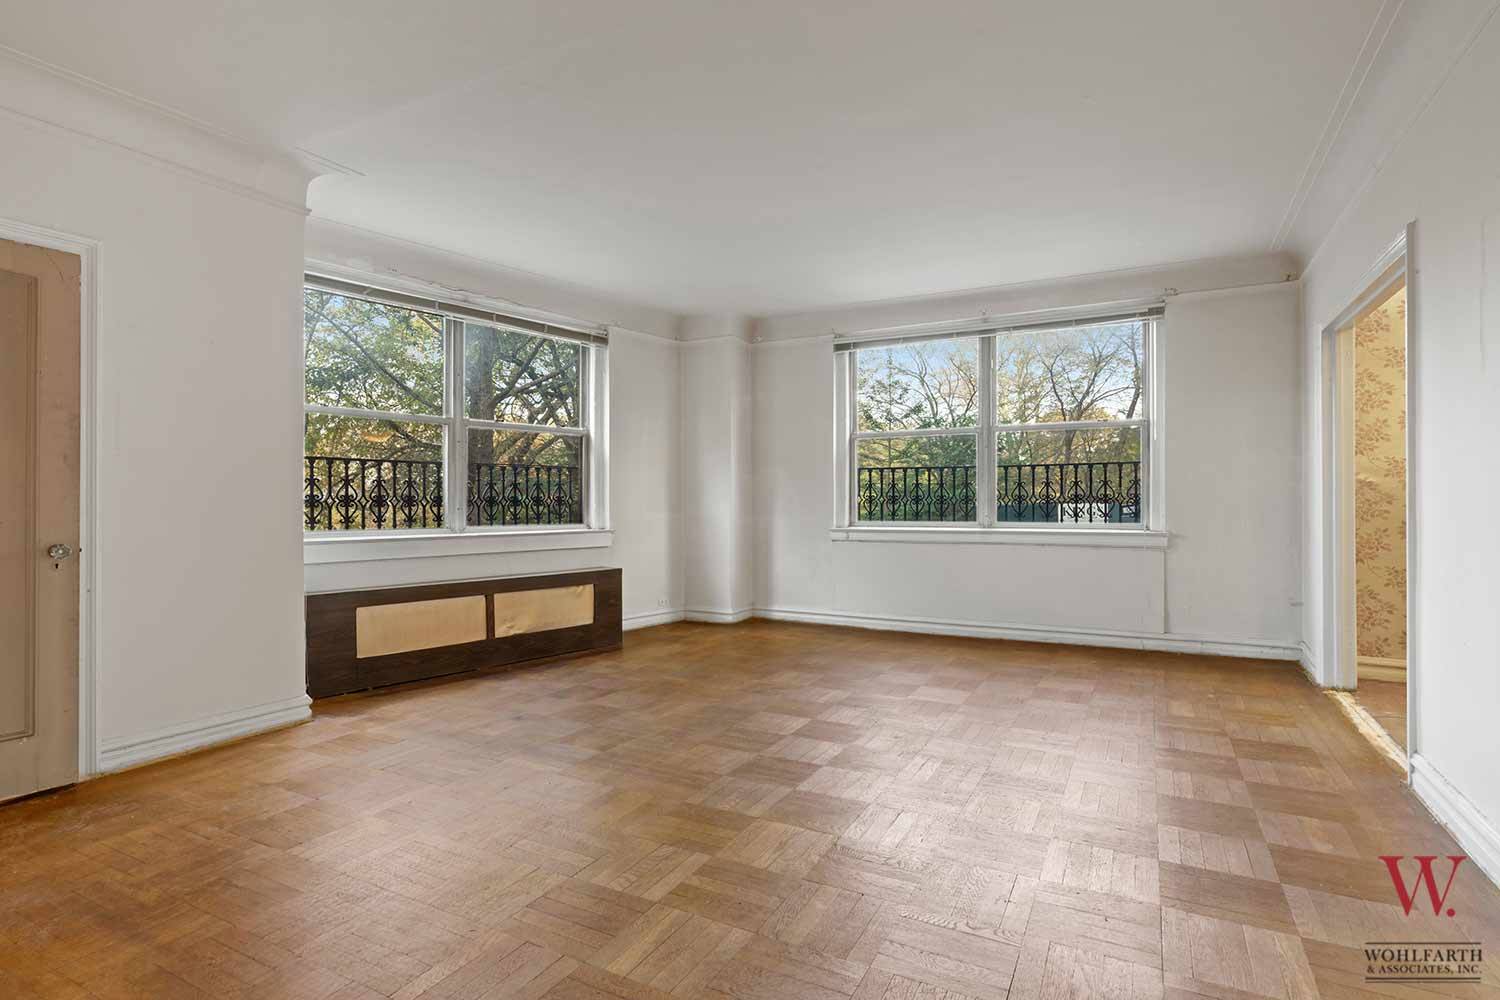 This tranquil and elegantly laid out two bedroom apartment has excellent light, with beautiful views of Riverside Park through its many oversized windows.